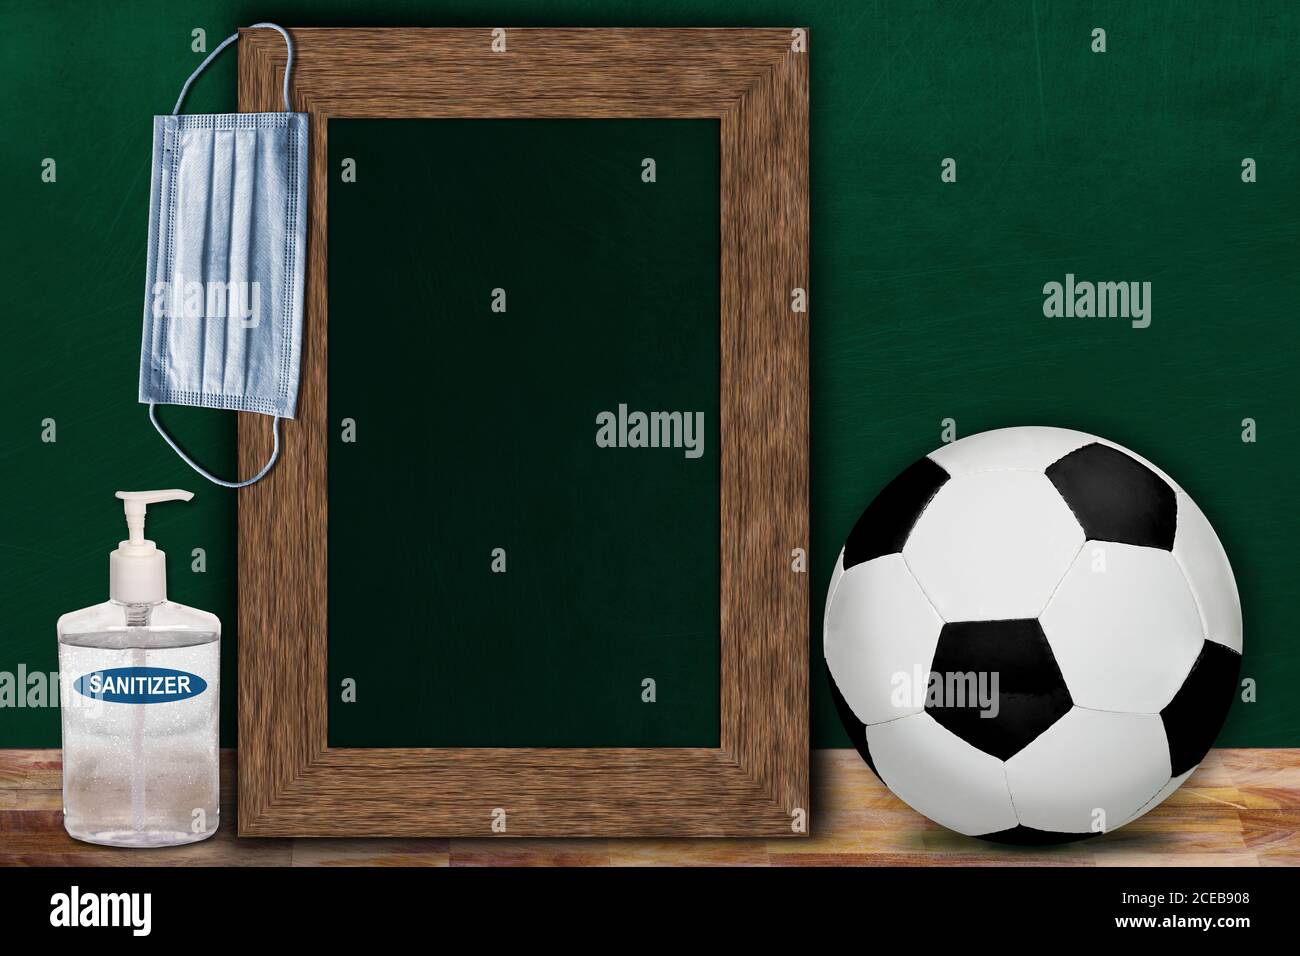 COVID-19 new normal sports concept in a classroom setting showing framed chalkboard with copy space and soccer ball on wooden table. Stock Photo